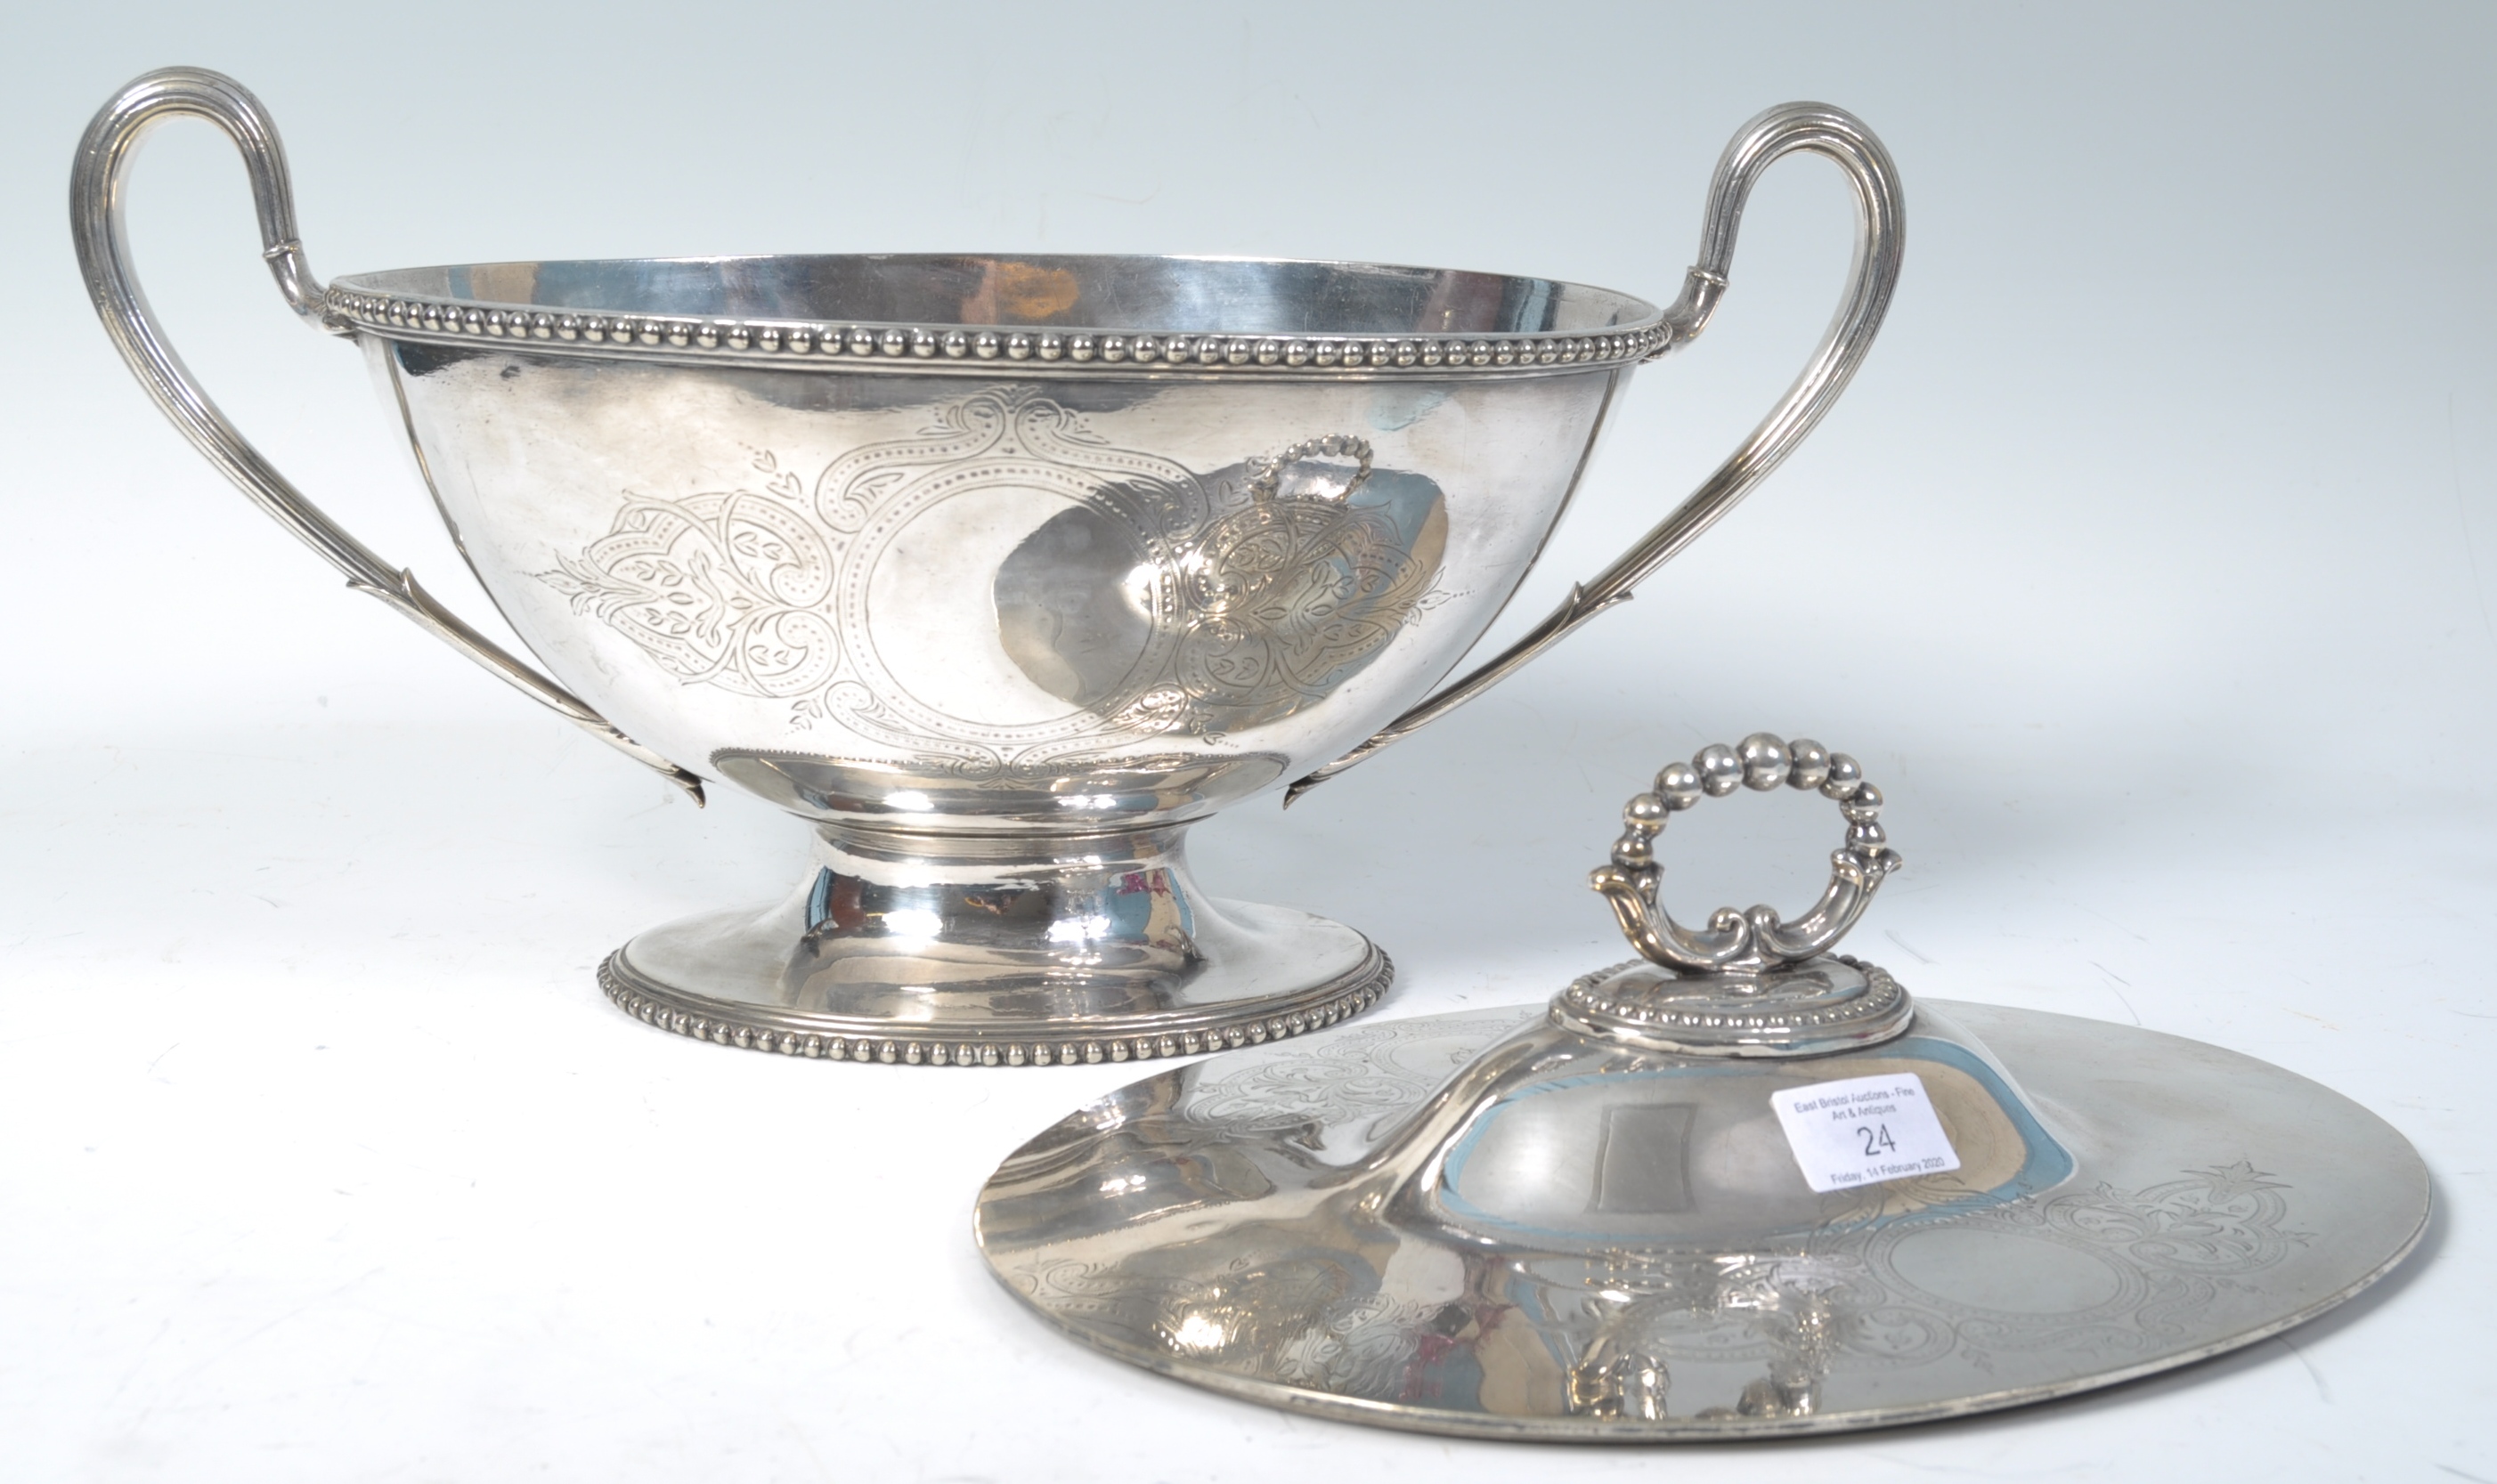 STUNNING 19TH CENTURY SILVER PLATED LARGE TUREEN - Image 2 of 6